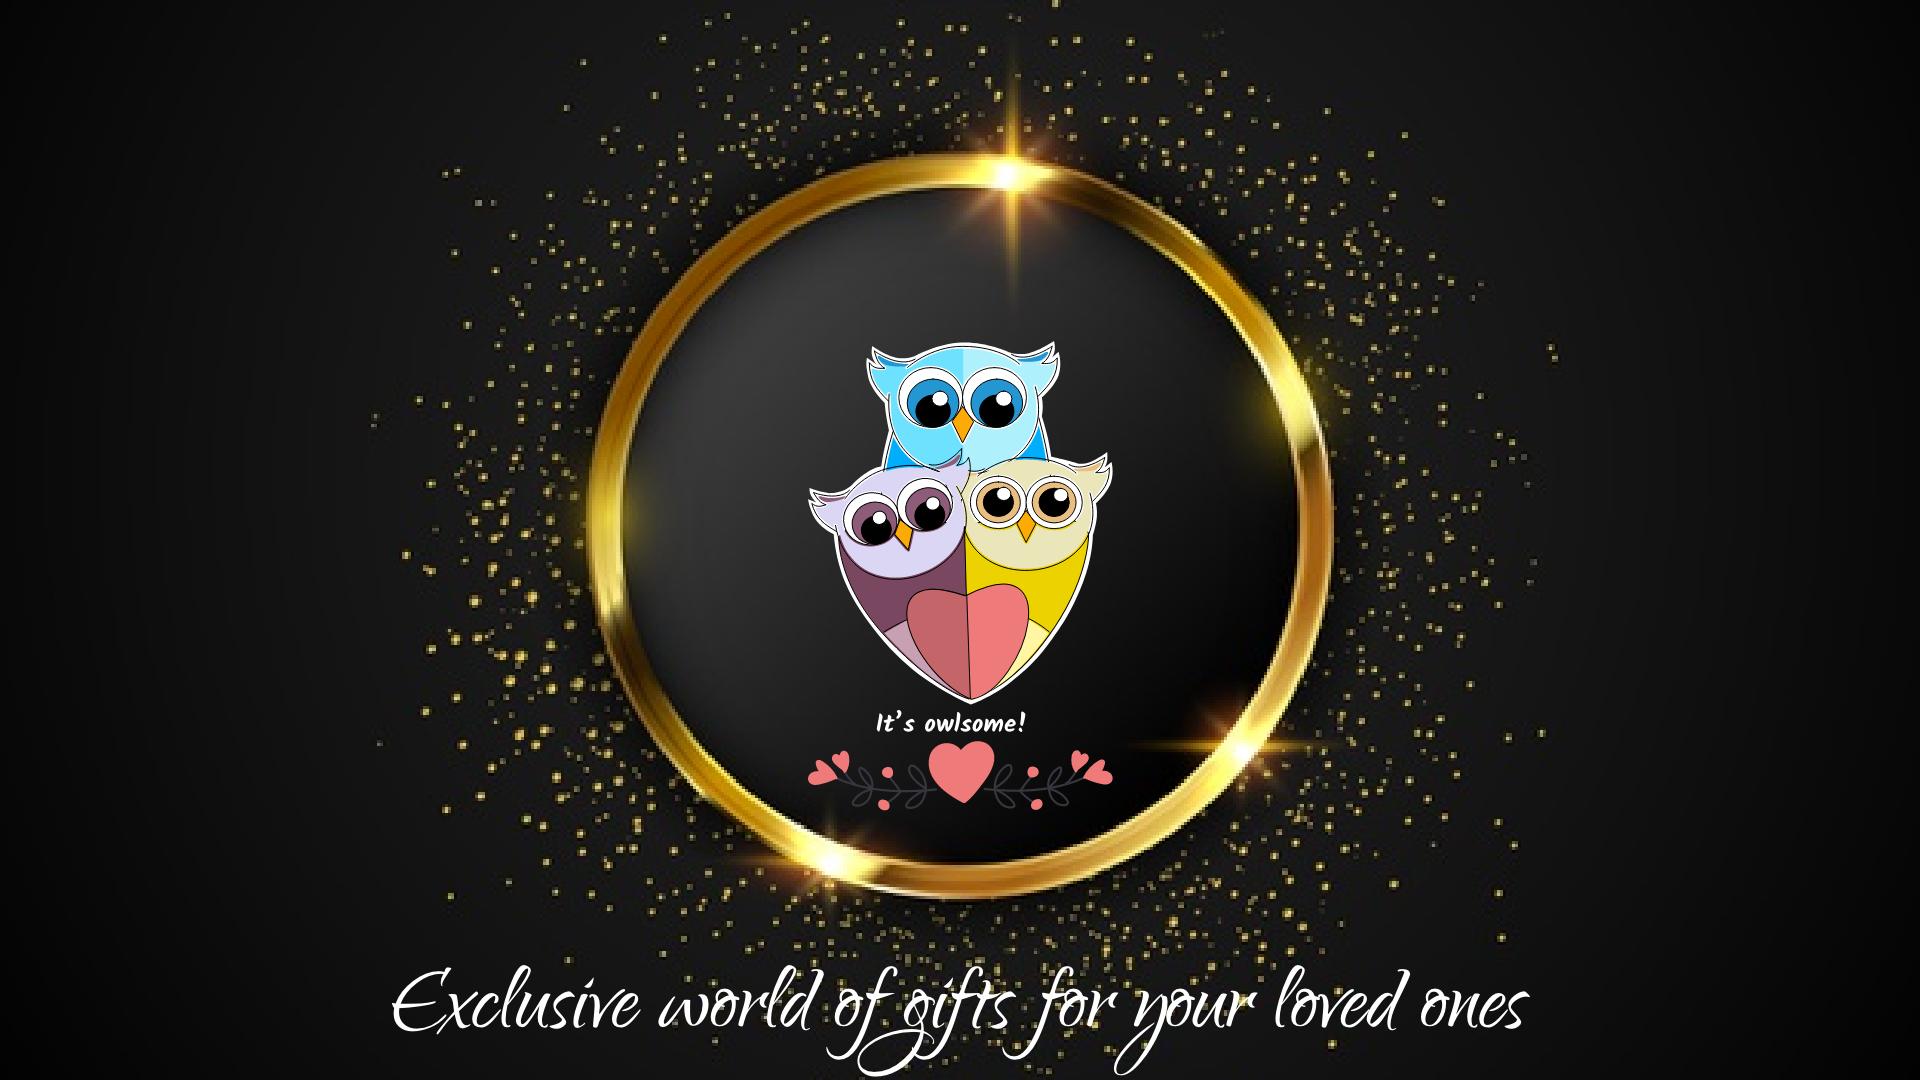 Exclusive world of gifts for your loved ones